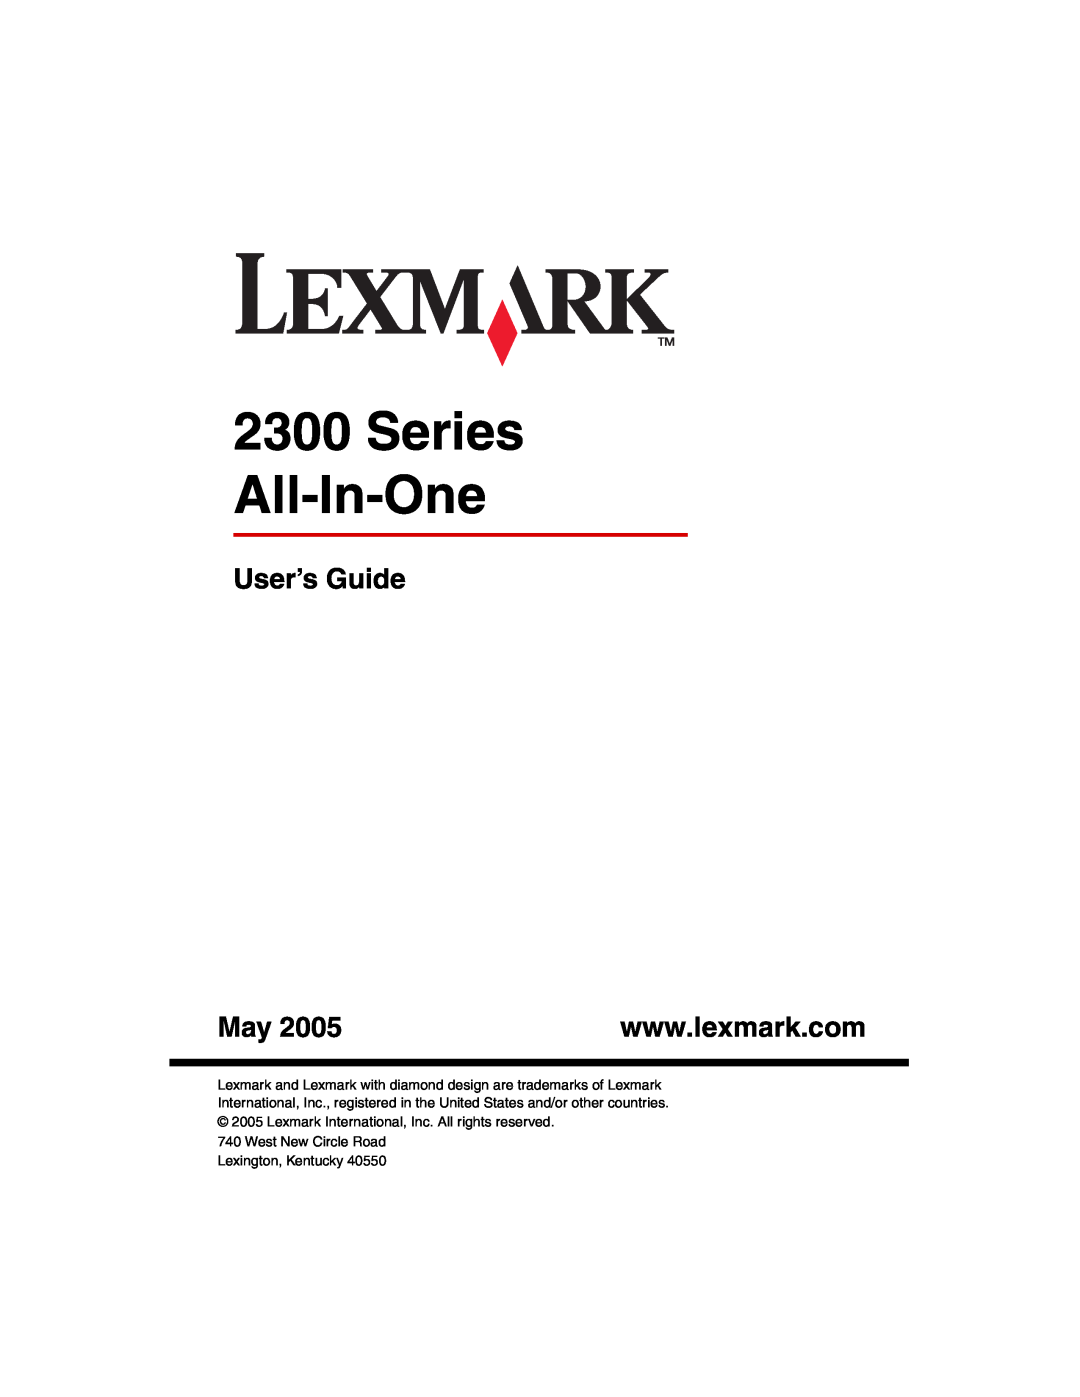 Lexmark X2300 Series manual Series All-In-One, User’s Guide, West New Circle Road Lexington, Kentucky 